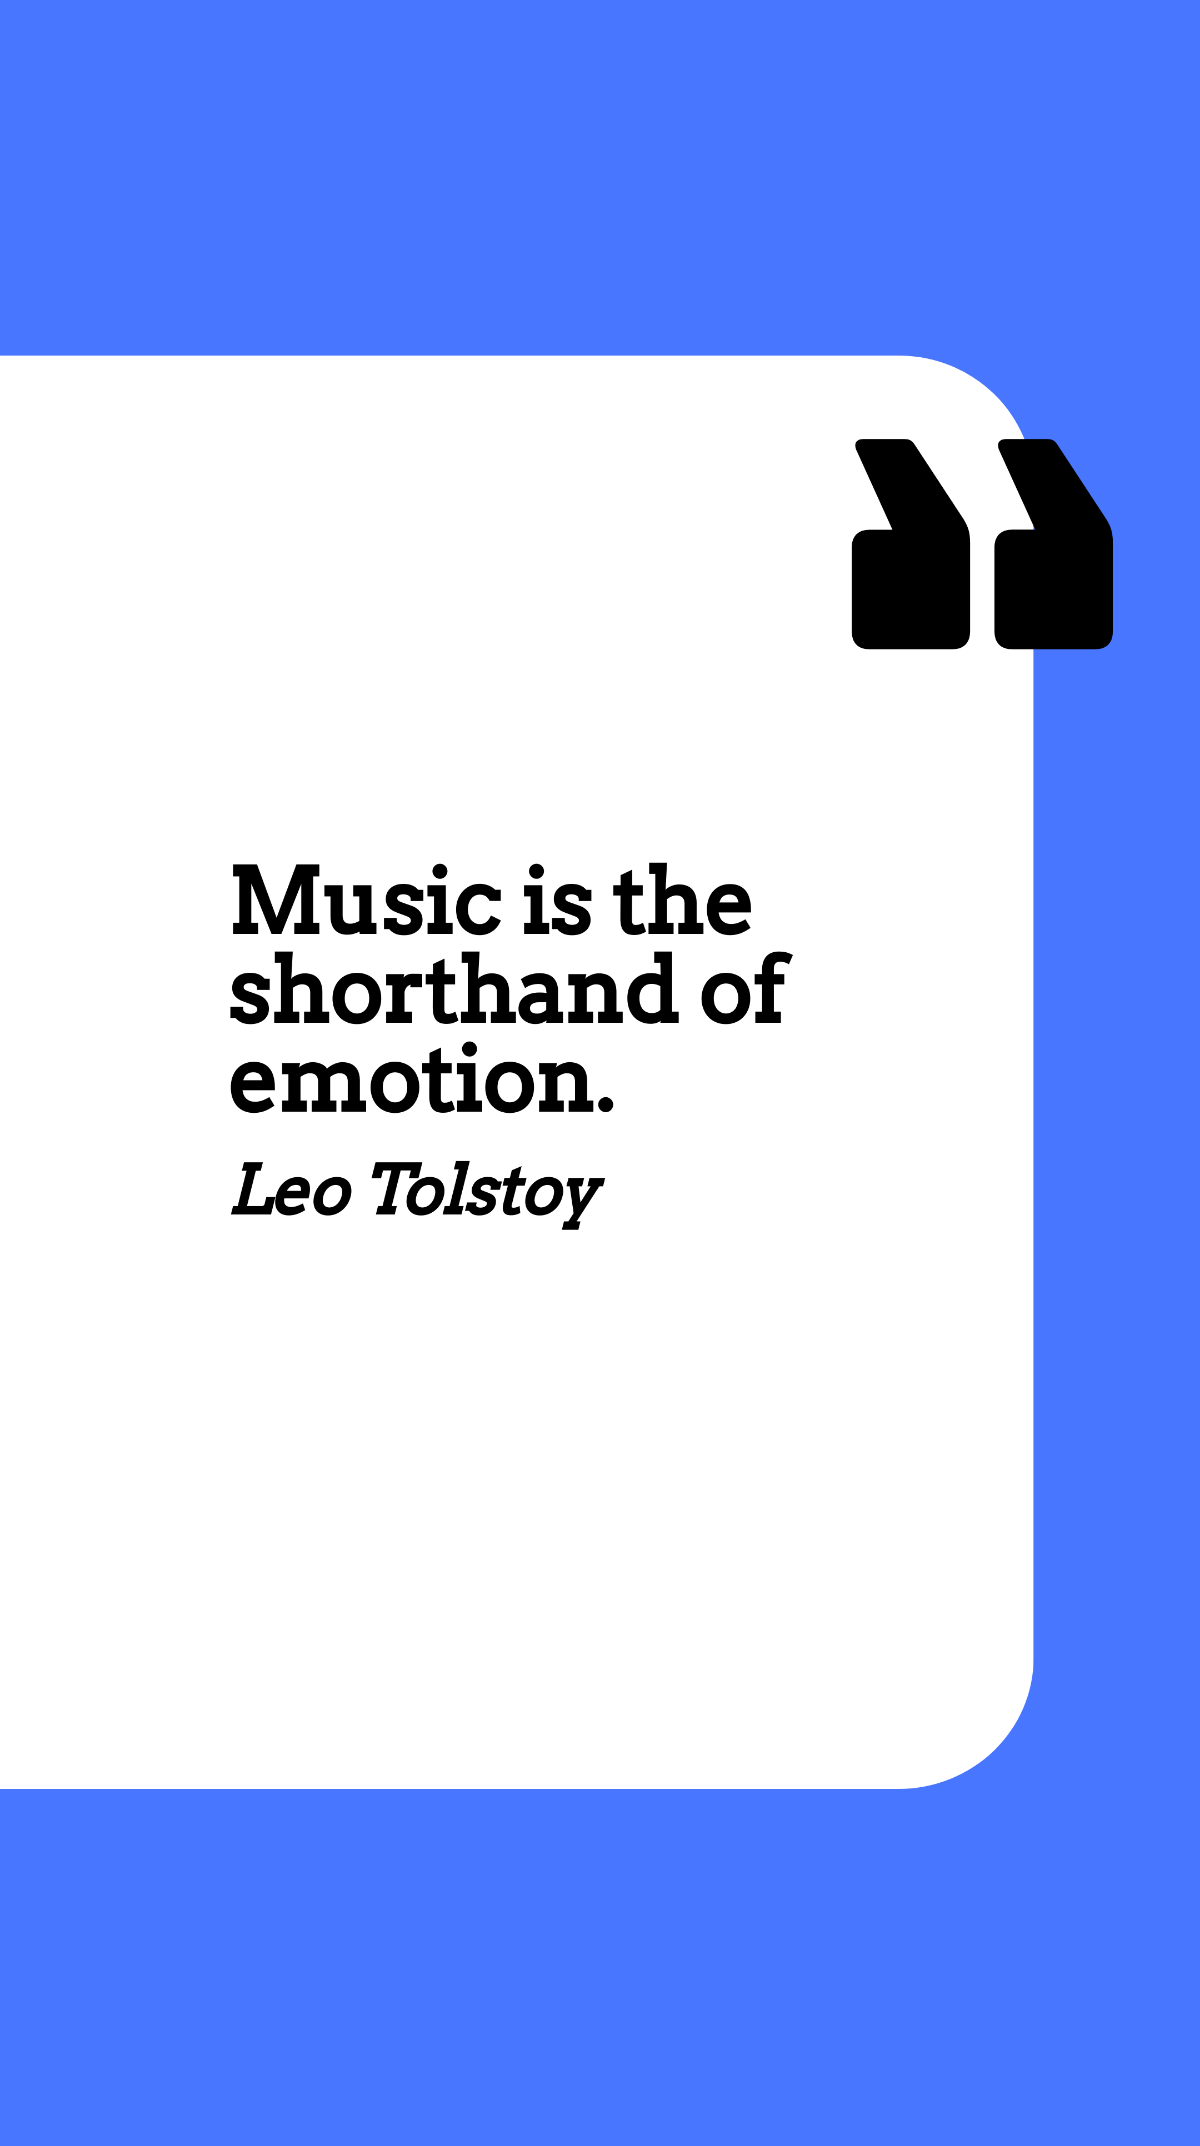 Leo Tolstoy - Music is the shorthand of emotion.